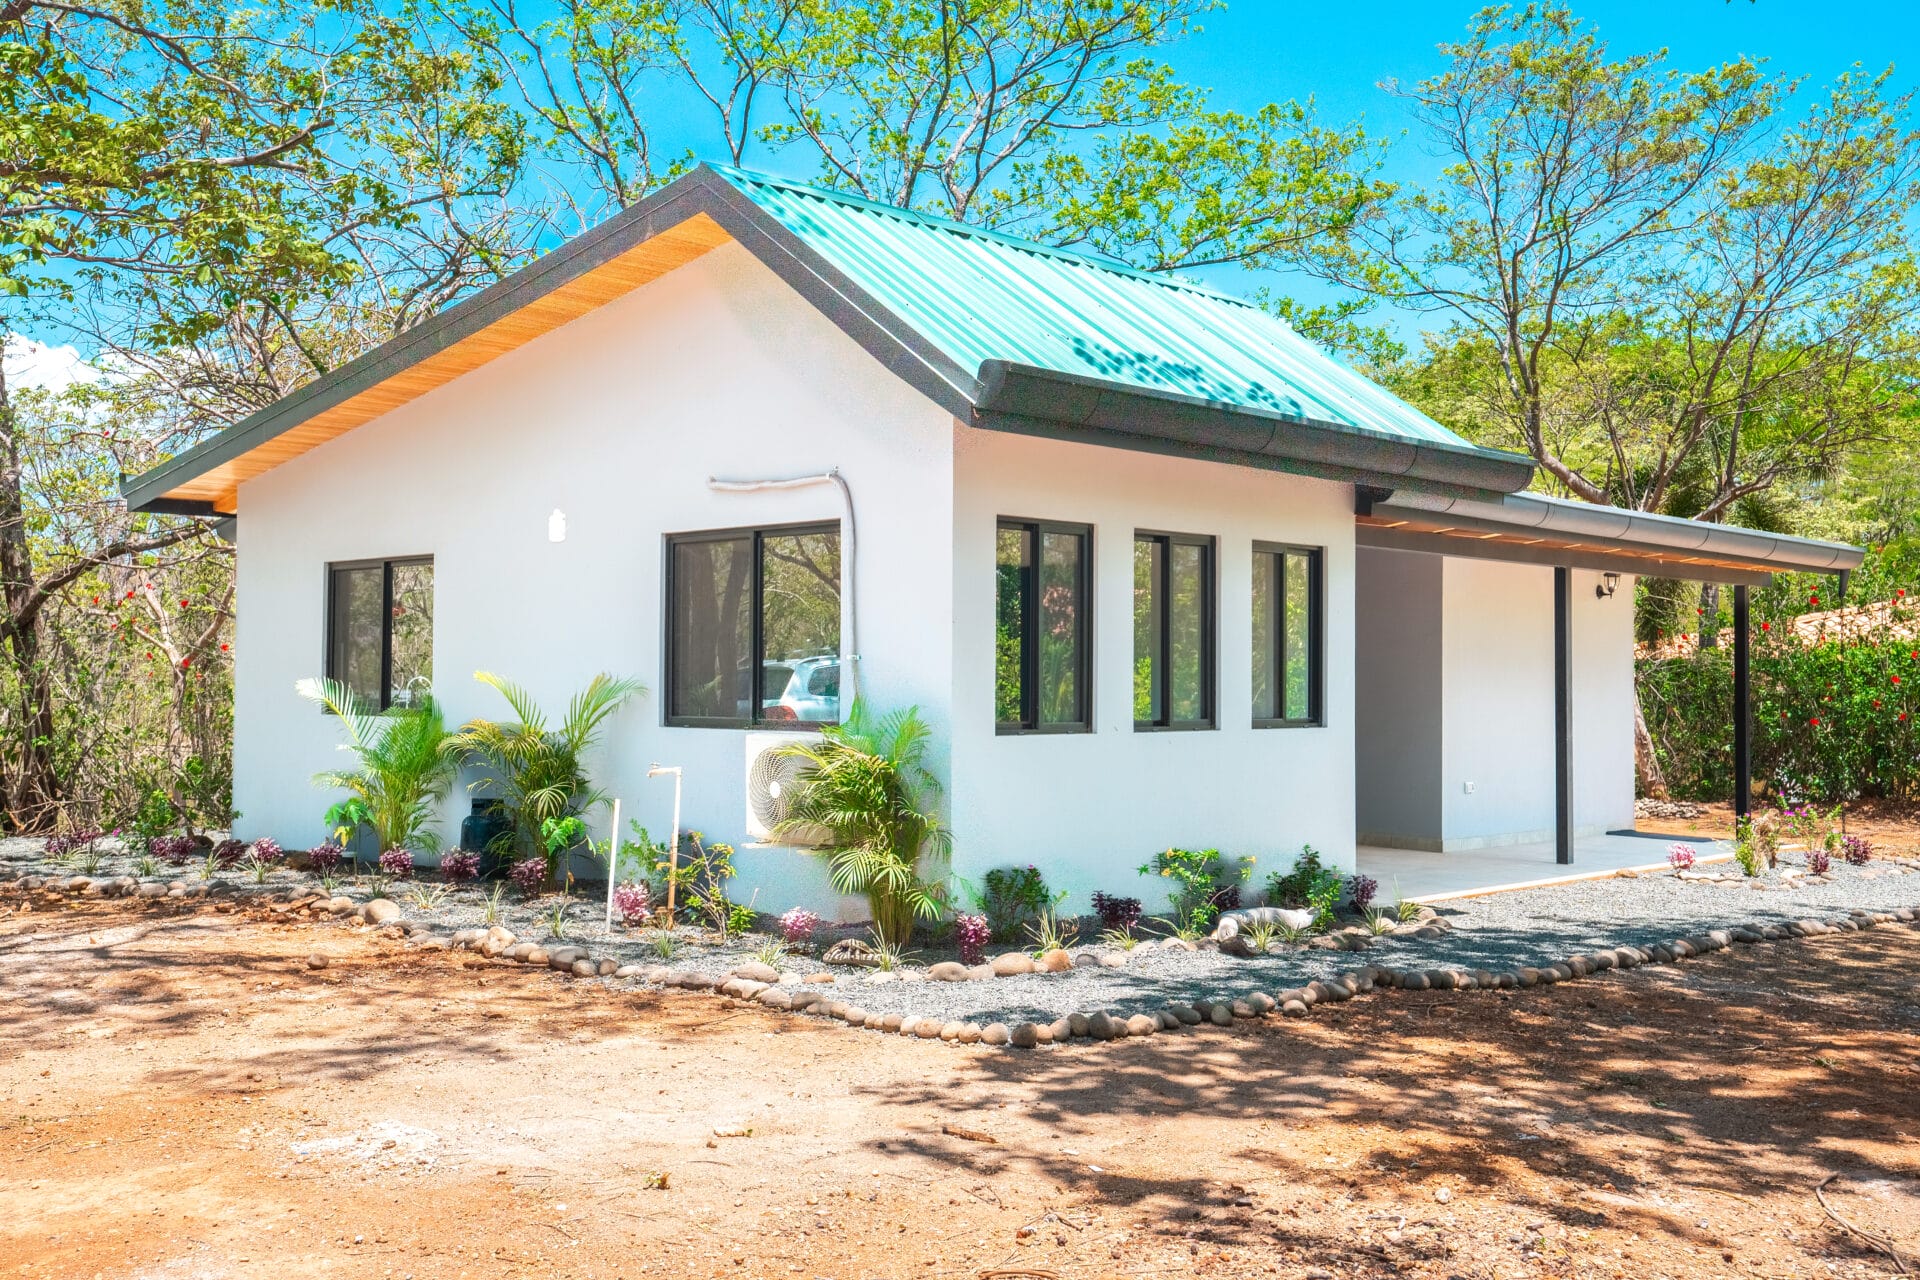 Junquillal Surf Heaven House – Newly Built, Detached Home Steps to Private Surf Beach!